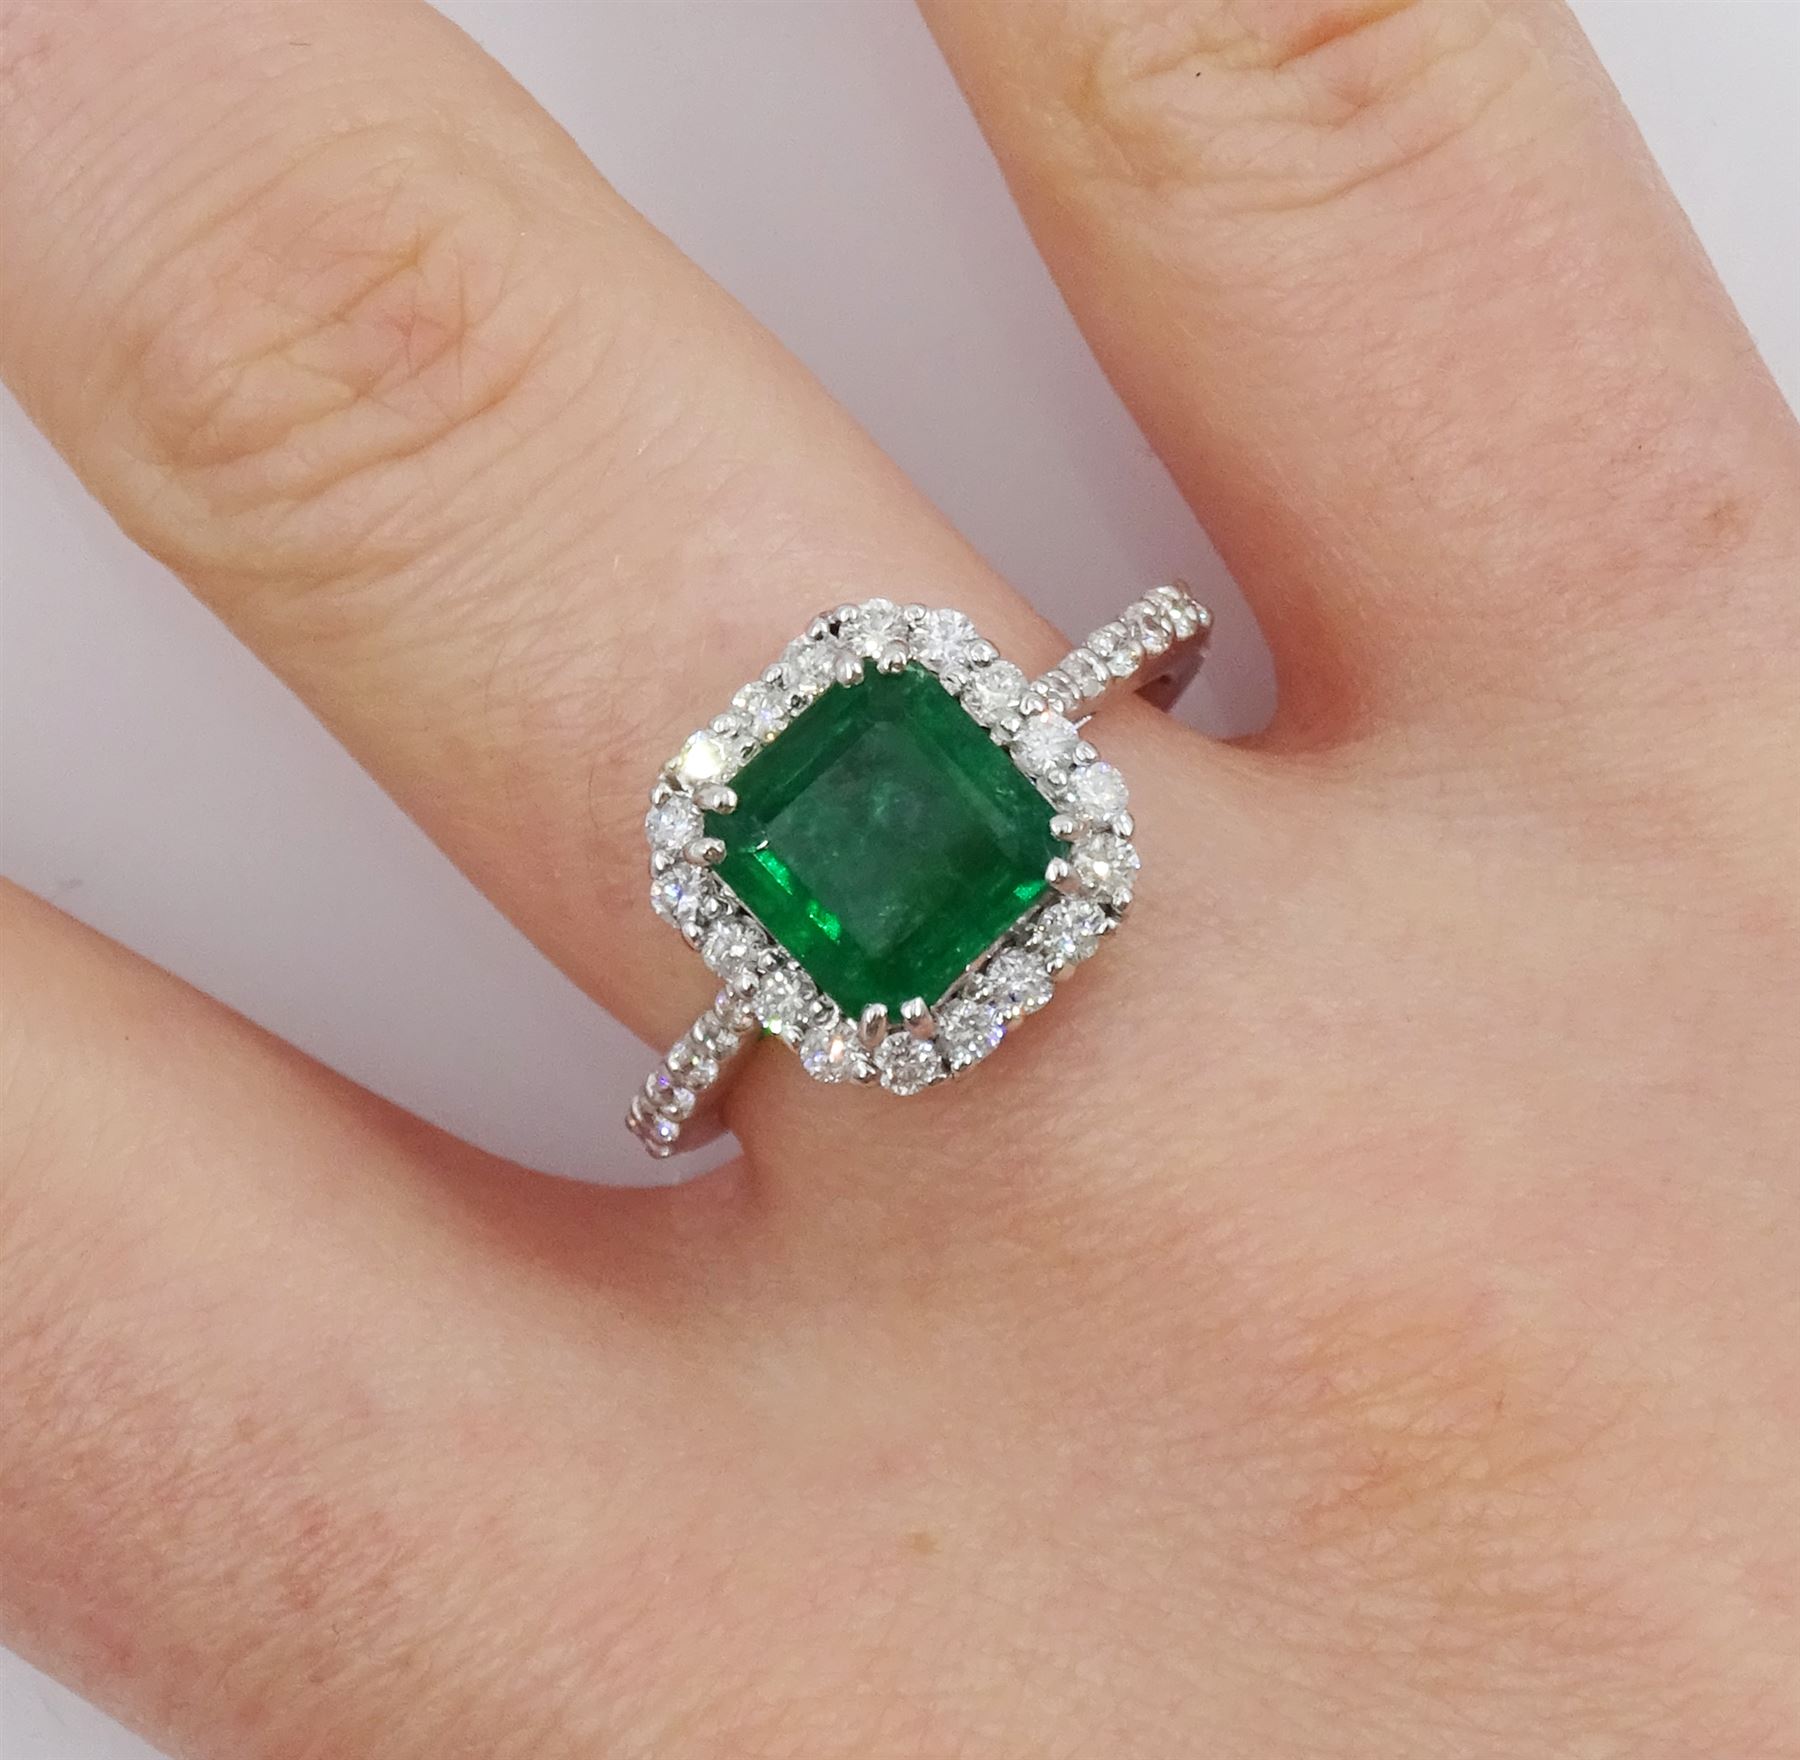 18ct white gold octagonal cut emerald and round brilliant cut diamond cluster ring - Image 2 of 4